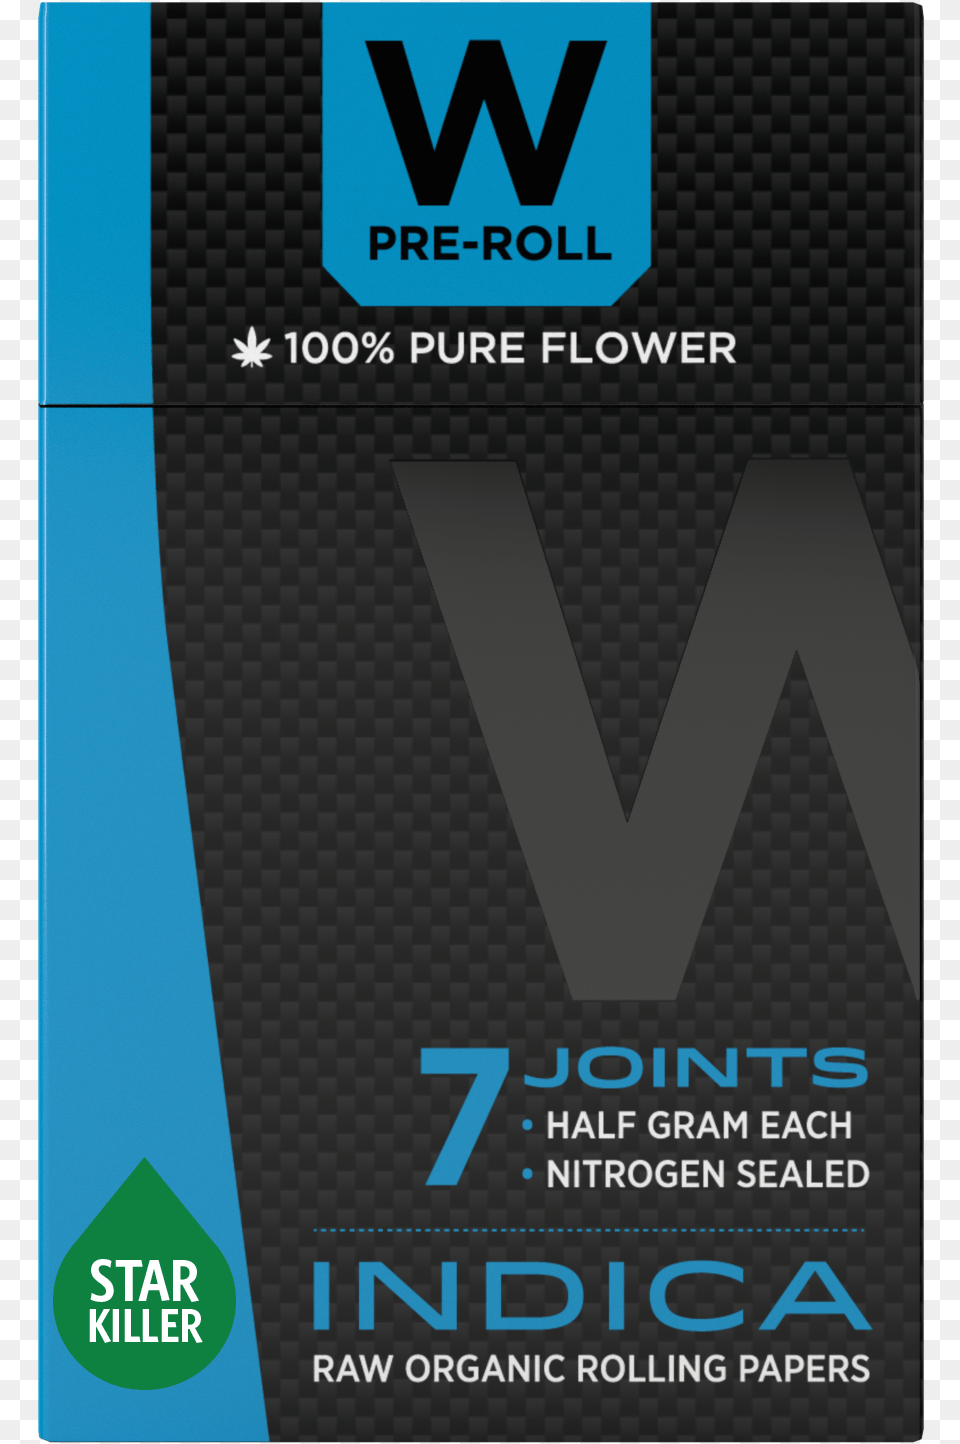 W Vapes Cannabis Pre Rolls Star Killer Indica Pre Roll Graphic Design, Advertisement, Poster Png Image